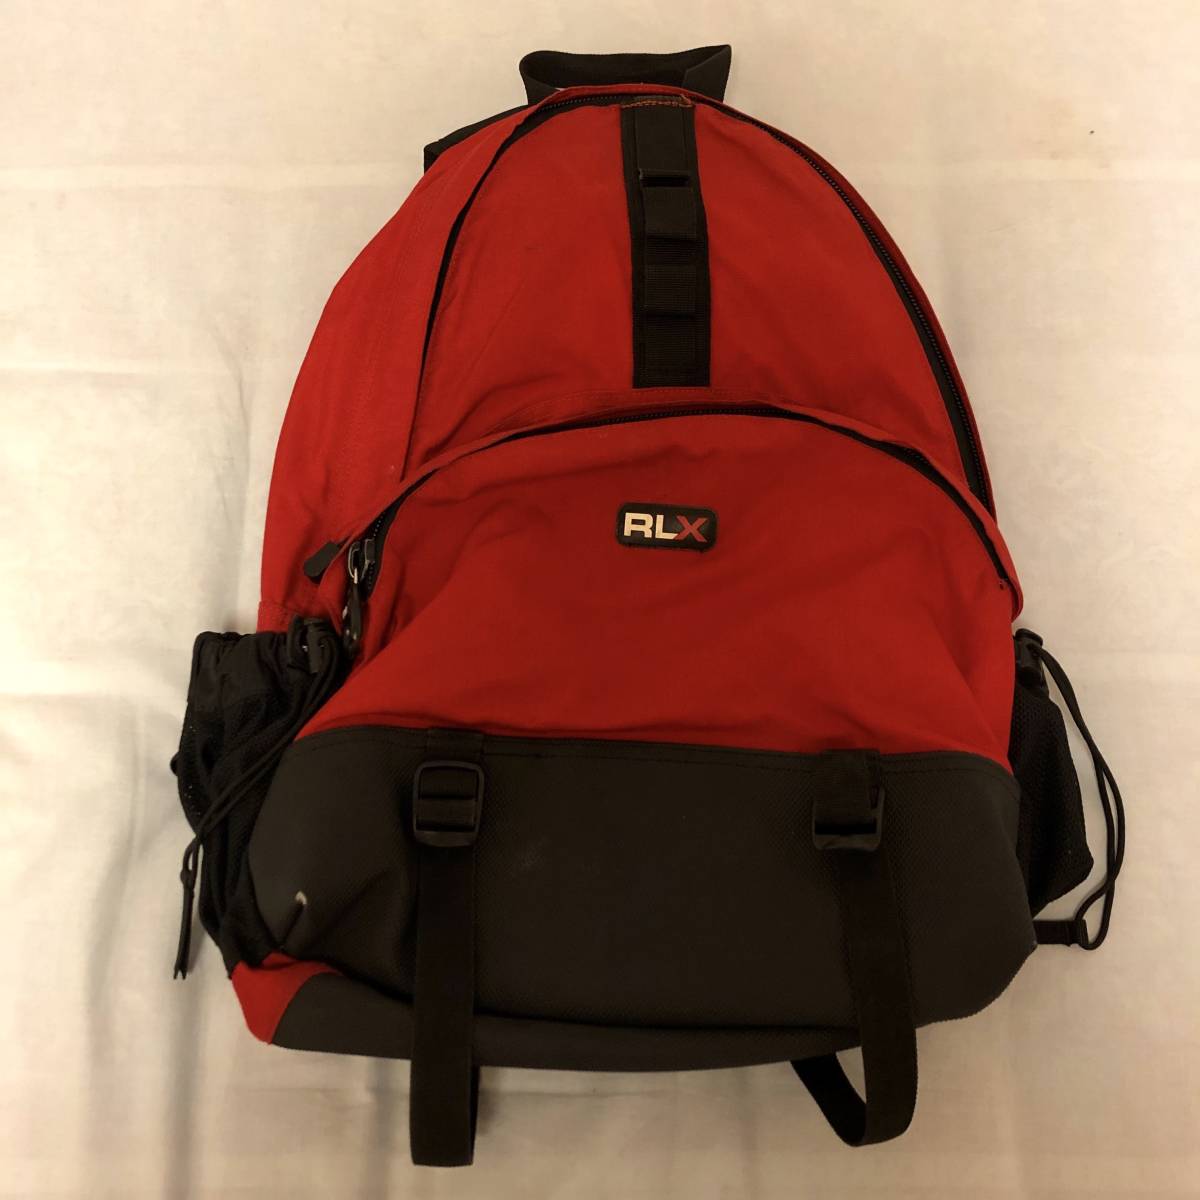 RLX Polo Sport Ralph Lauren red backpack バックパック レッド リュック stadium p wing cap sport rlx rrl country 1992 1993_画像1